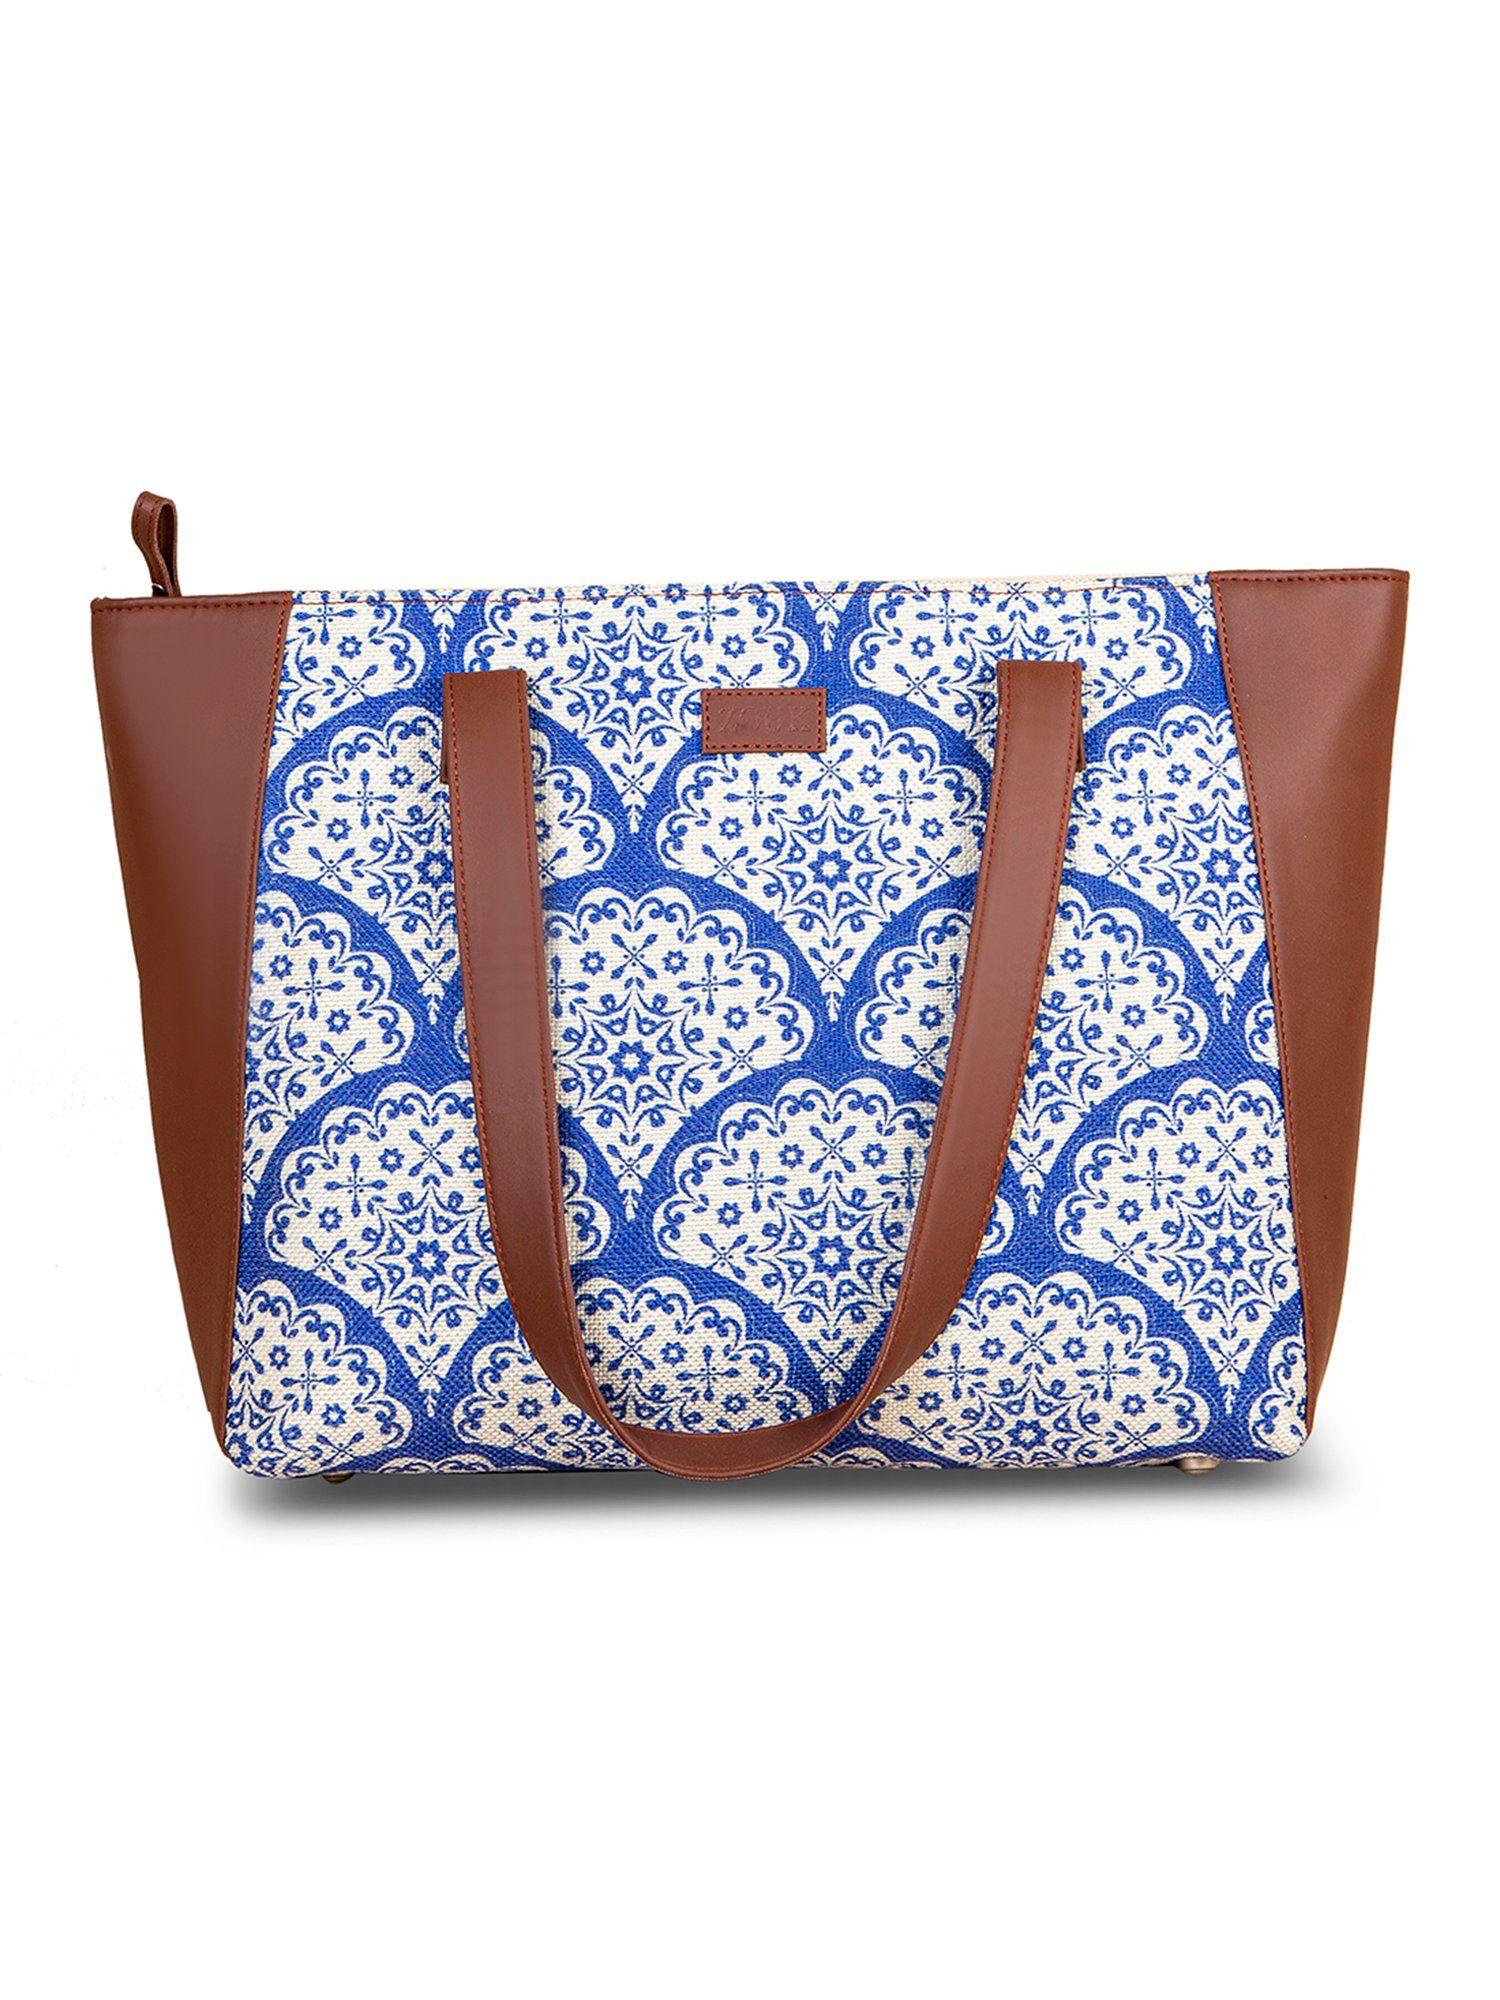 Women Handcrafted Floral Side Tote Bag & Handbag for Office and College-Blue